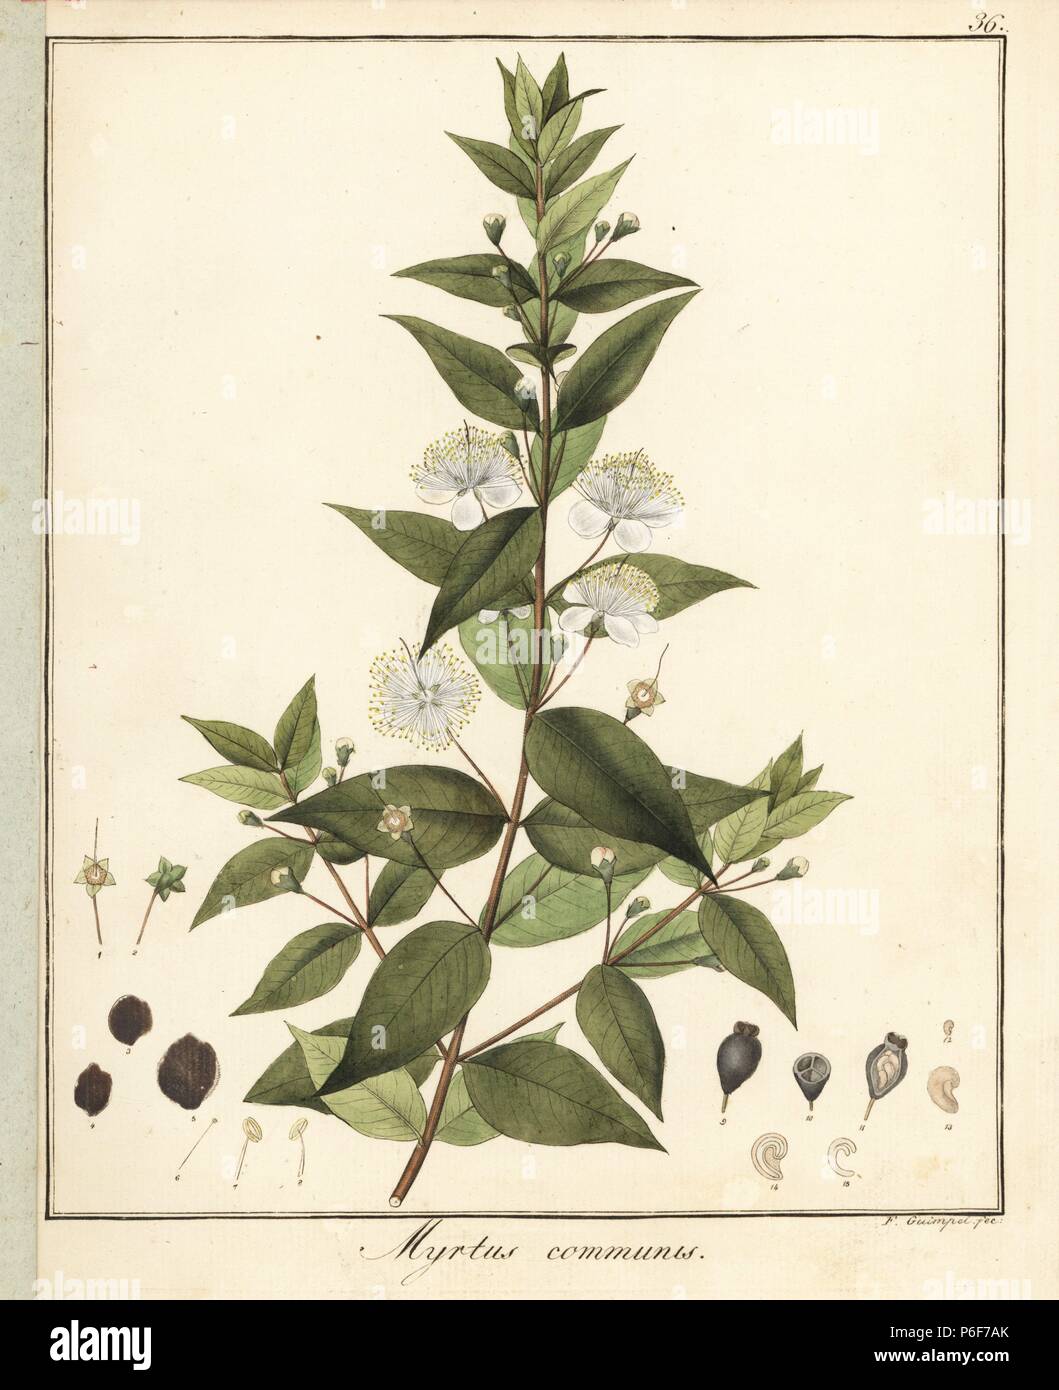 Common or true myrtle, Myrtus communis. Handcoloured copperplate engraving by F. Guimpel from Dr. Friedrich Gottlob Hayne's Medical Botany, Berlin, 1822. Hayne (1763-1832) was a German botanist, apothecary and professor of pharmaceutical botany at Berlin University. Stock Photo